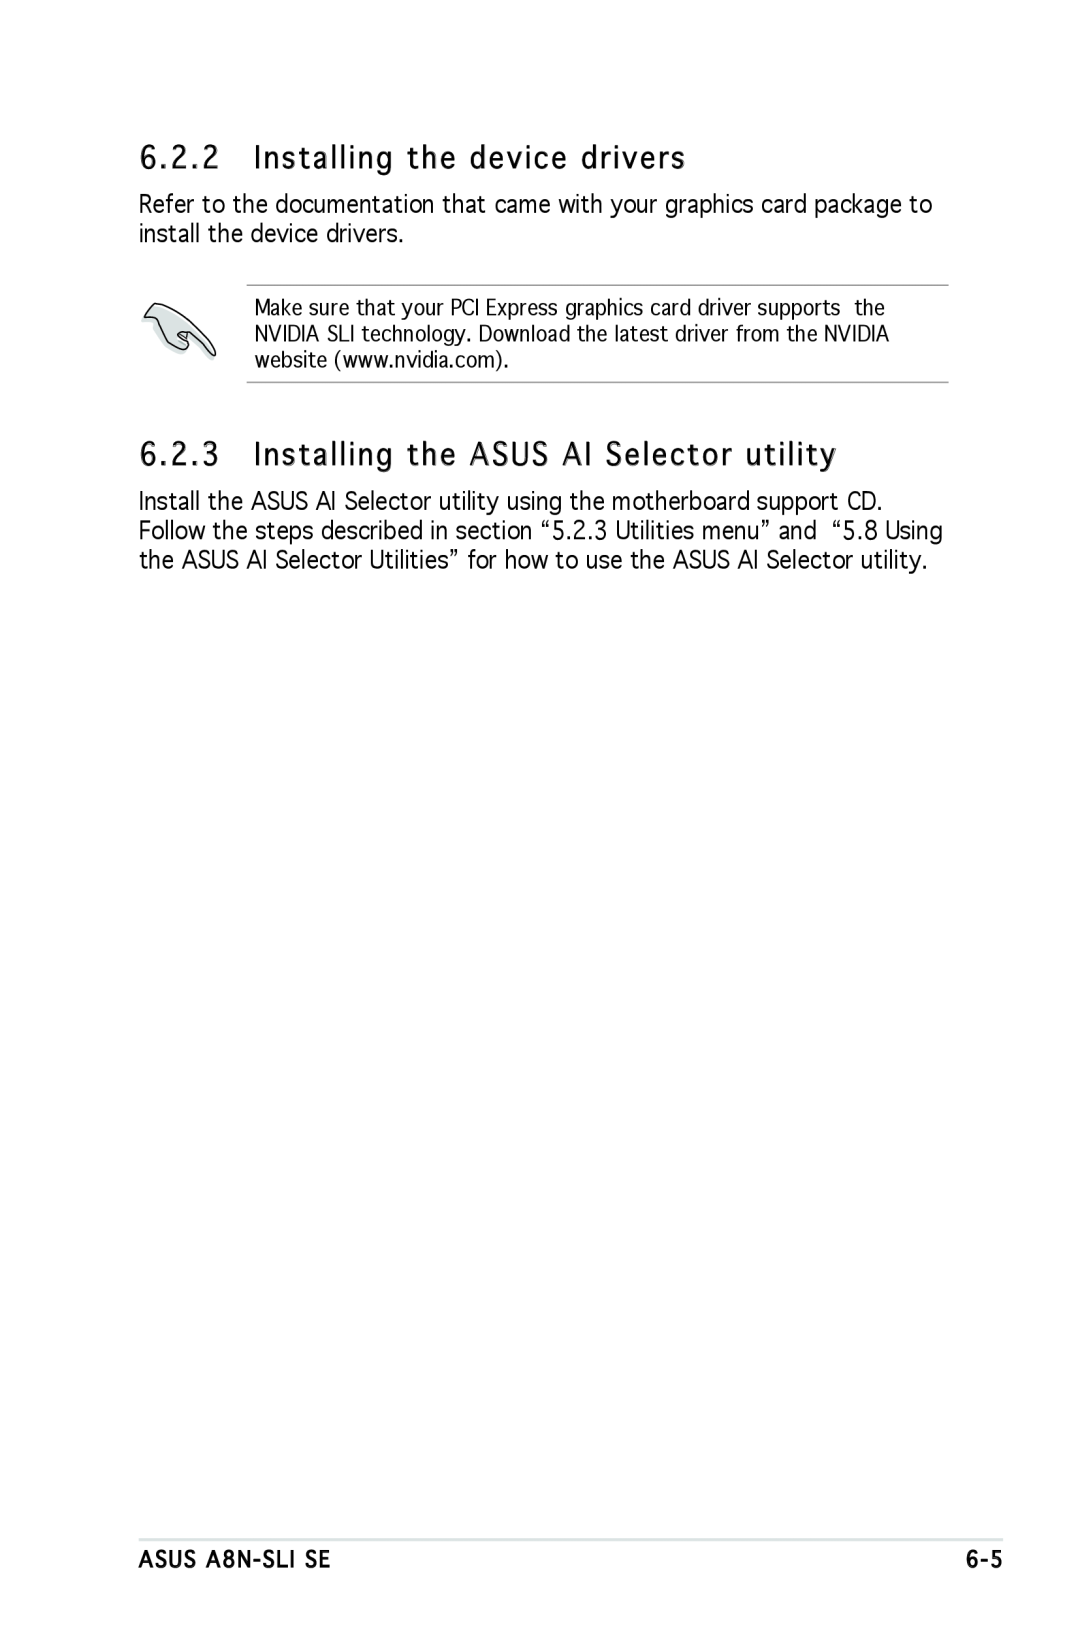 Asus A8N-SLI SE manual Installing the device drivers, Installing the ASUS AI Selector utility 